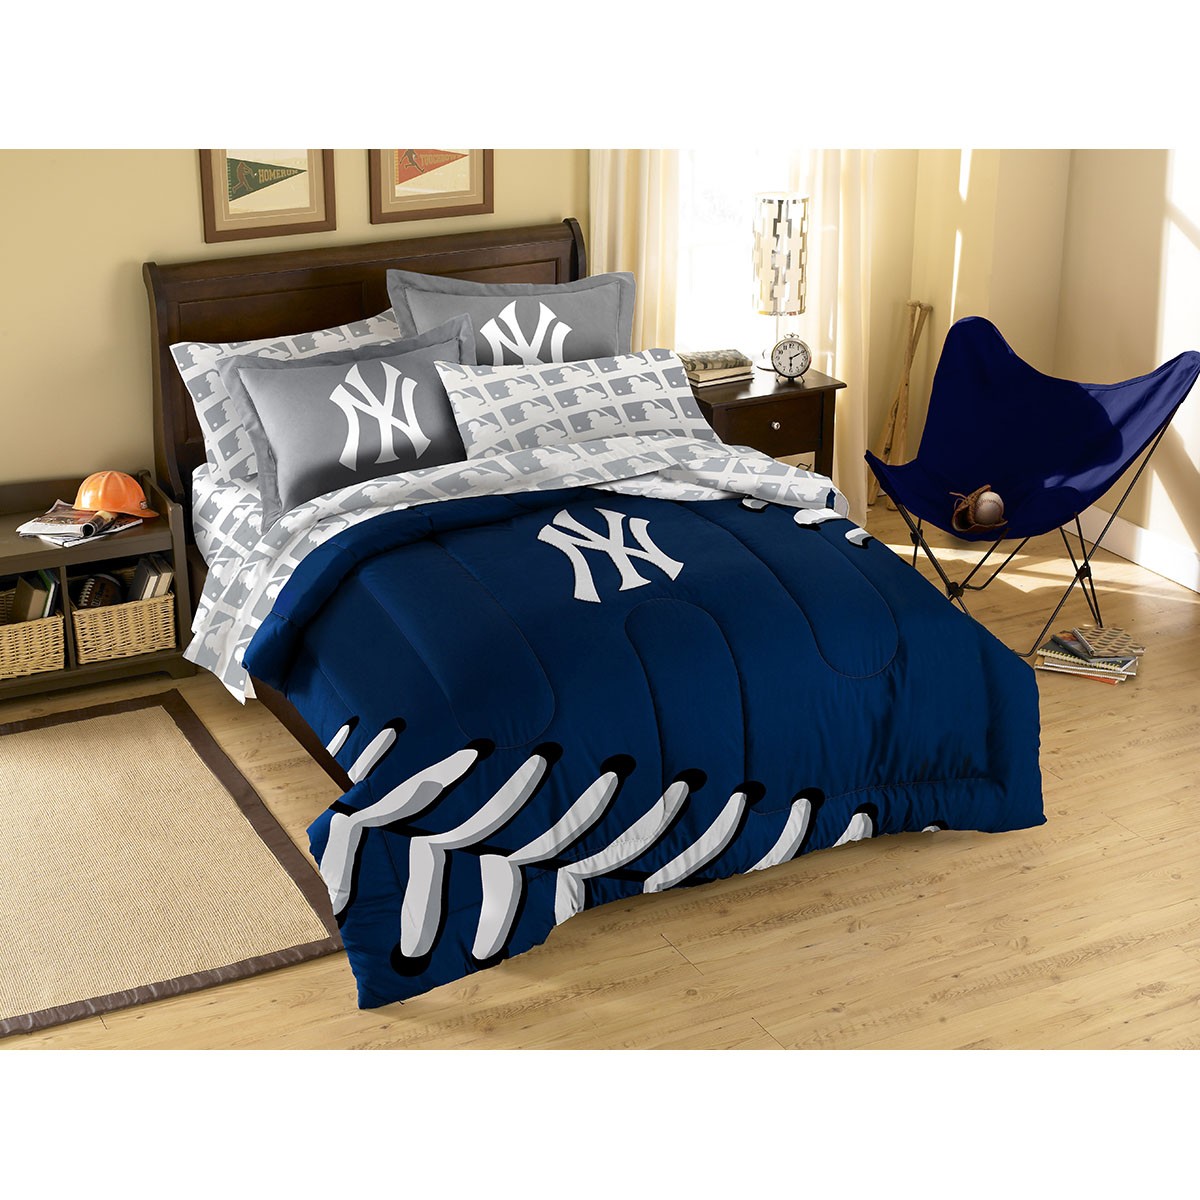 New York Yankees Contrast Twin Forter Bed In A Bag